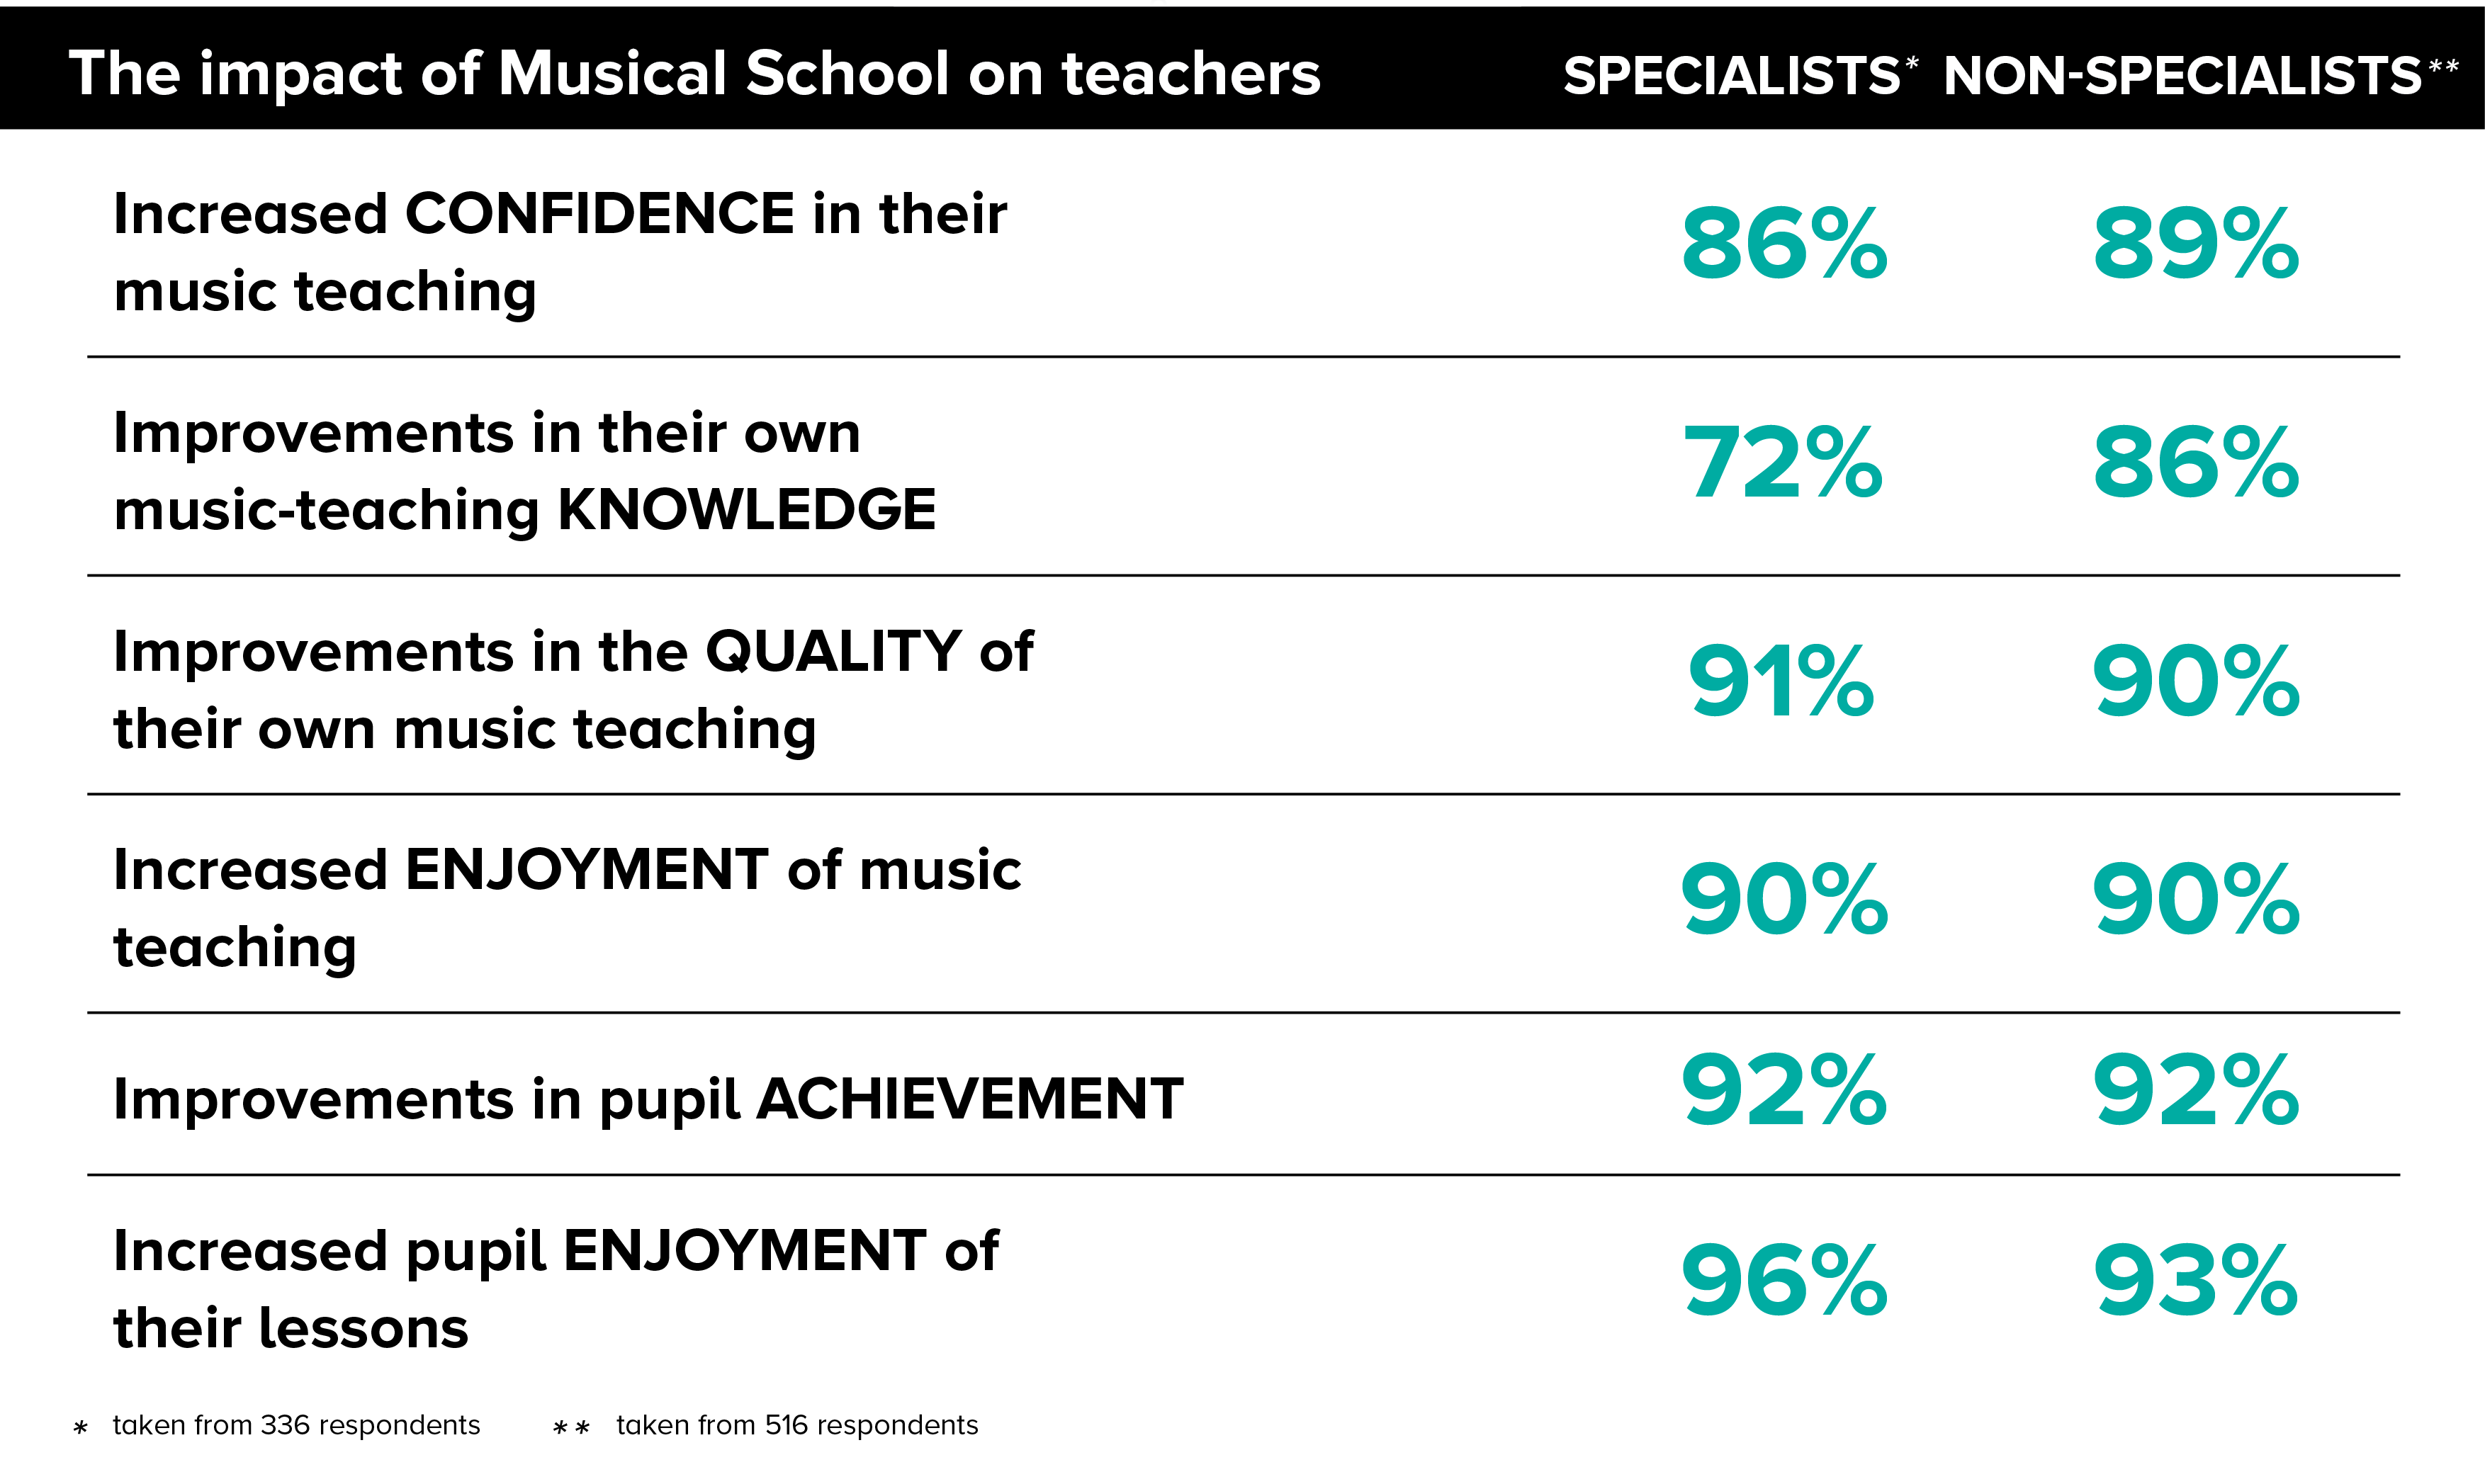 Survey Reveals Major Positive Impact Of Musical School In Uk Schools - it is clear from the above that charanga musical school is having a major impact on key areas of music teaching and learning for all teachers both